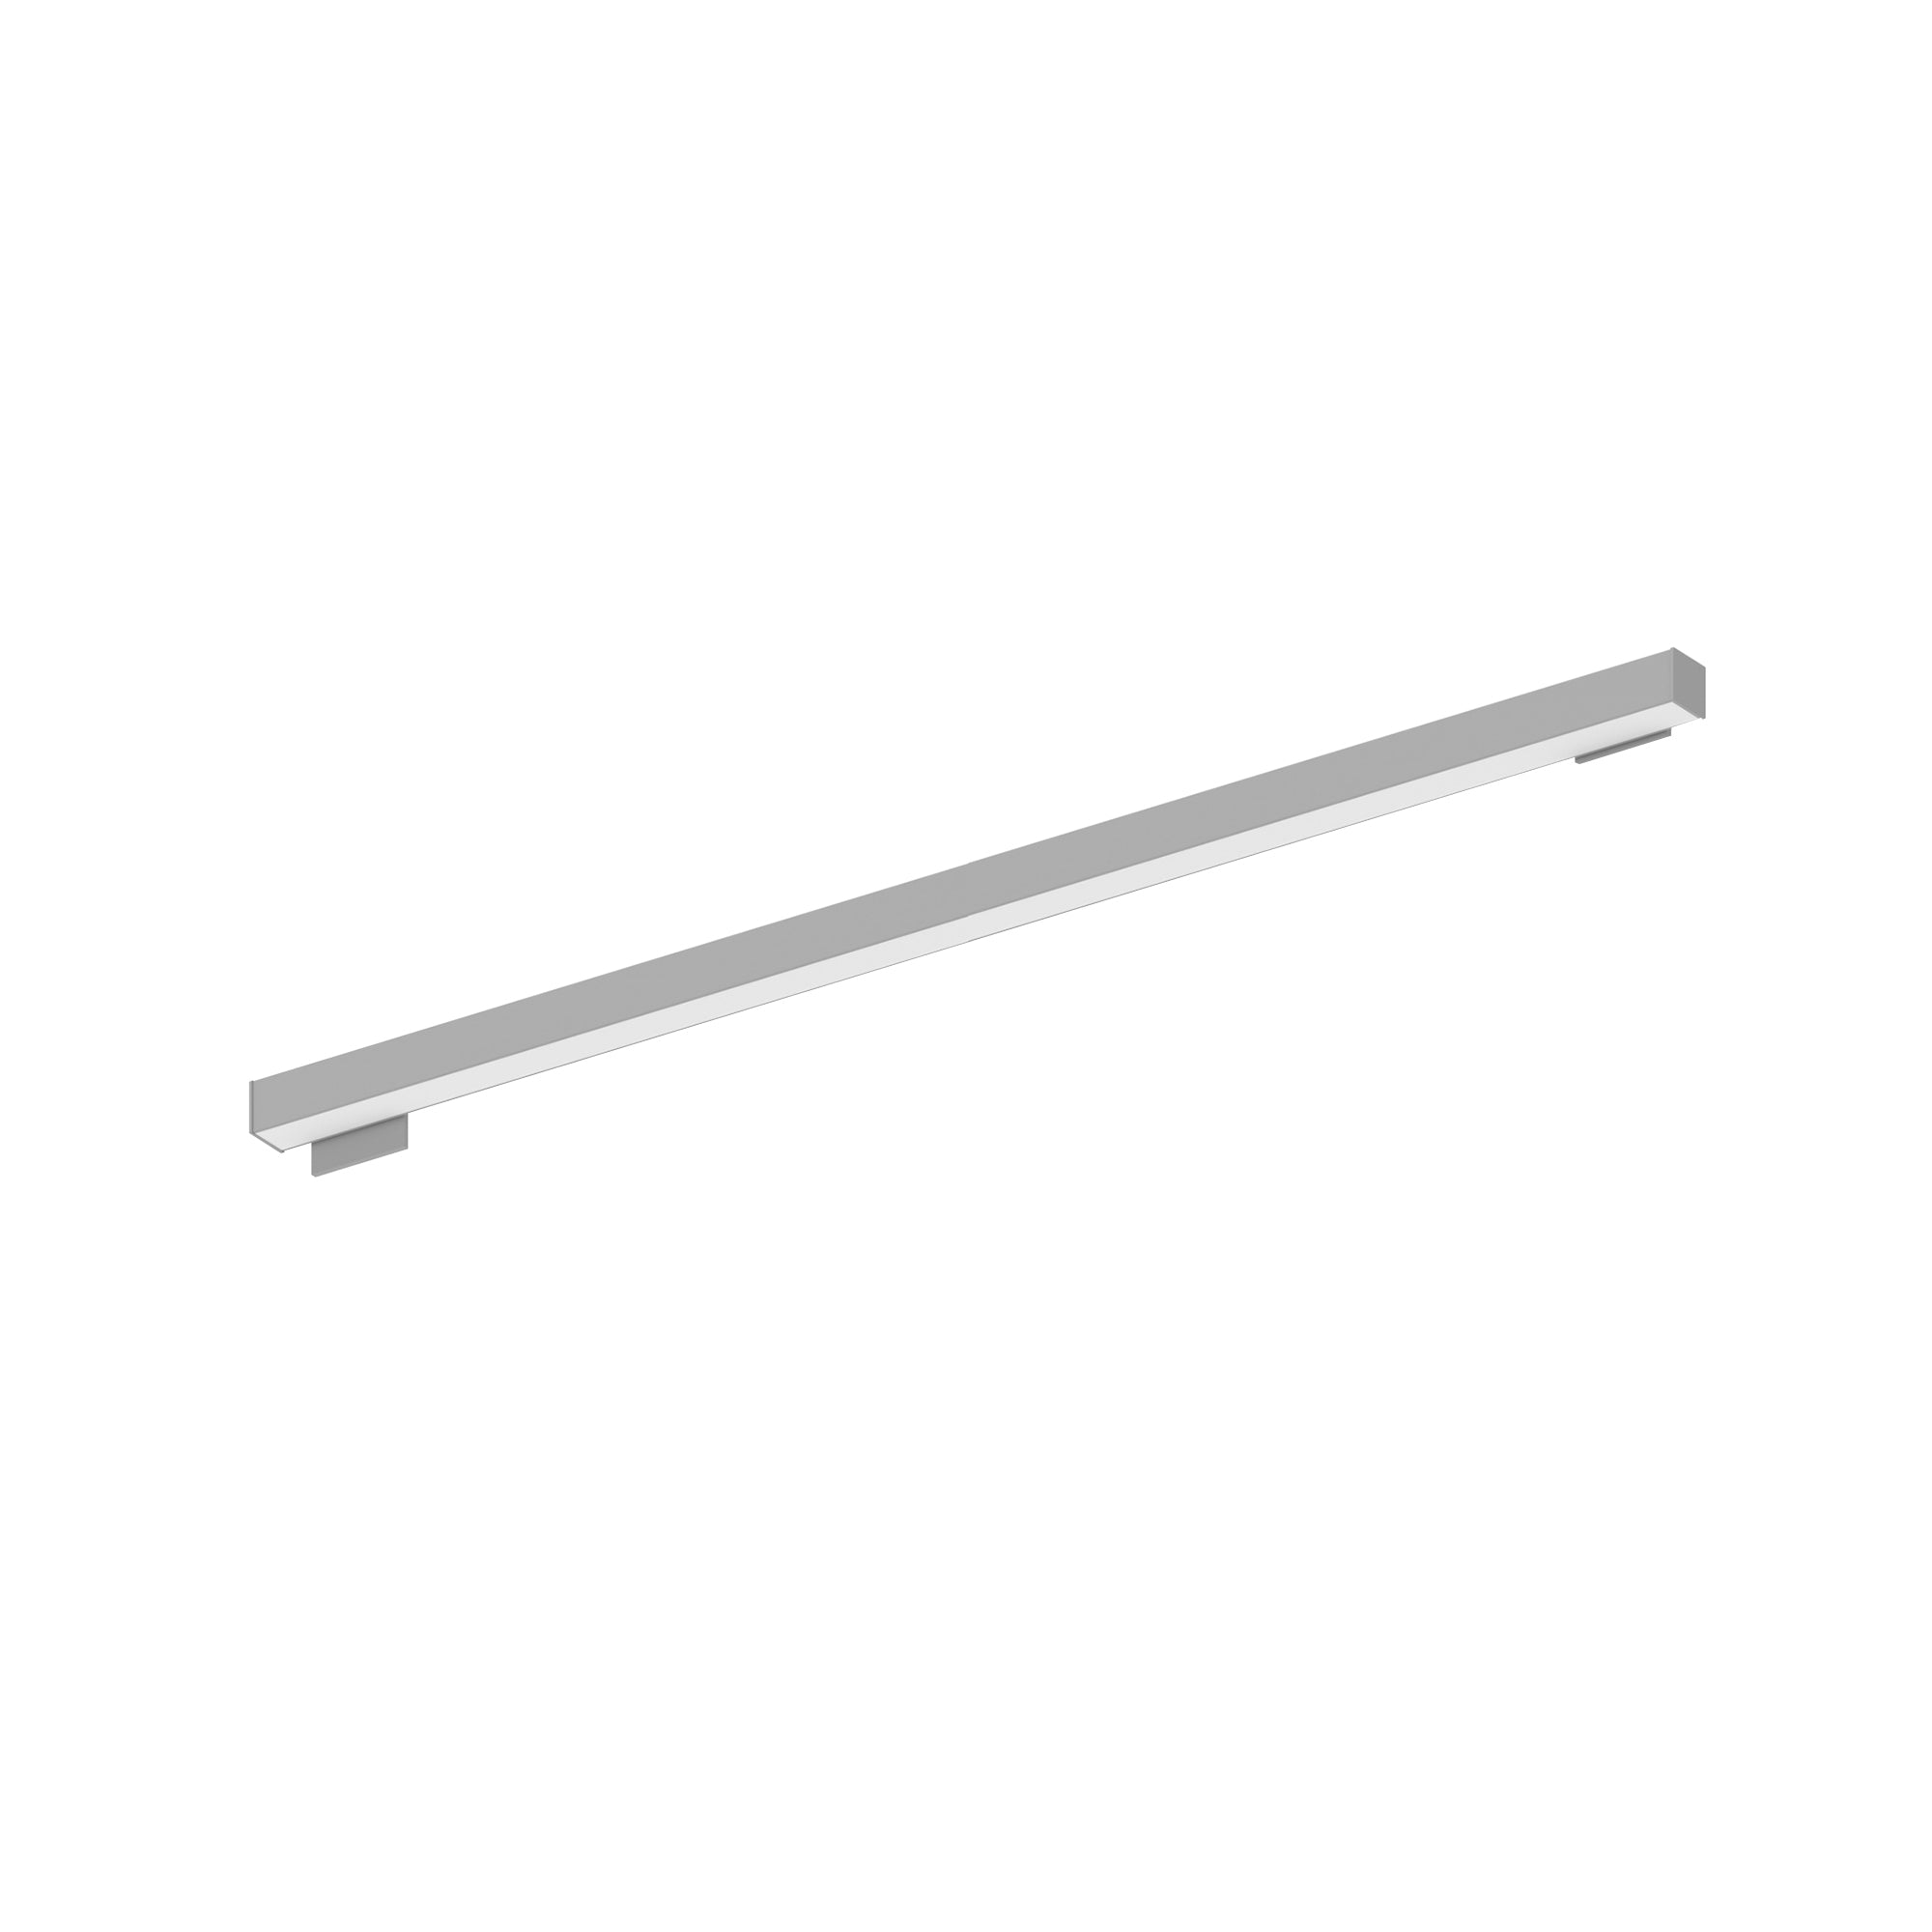 Nora Lighting NWLIN-81040A/L4P-R2 - Linear - 8' L-Line LED Wall Mount Linear, 8400lm / 4000K, 4 Inchx4 Inch Left Plate & 2 Inchx4 Inch Right Plate, Left Power Feed, Aluminum Finish